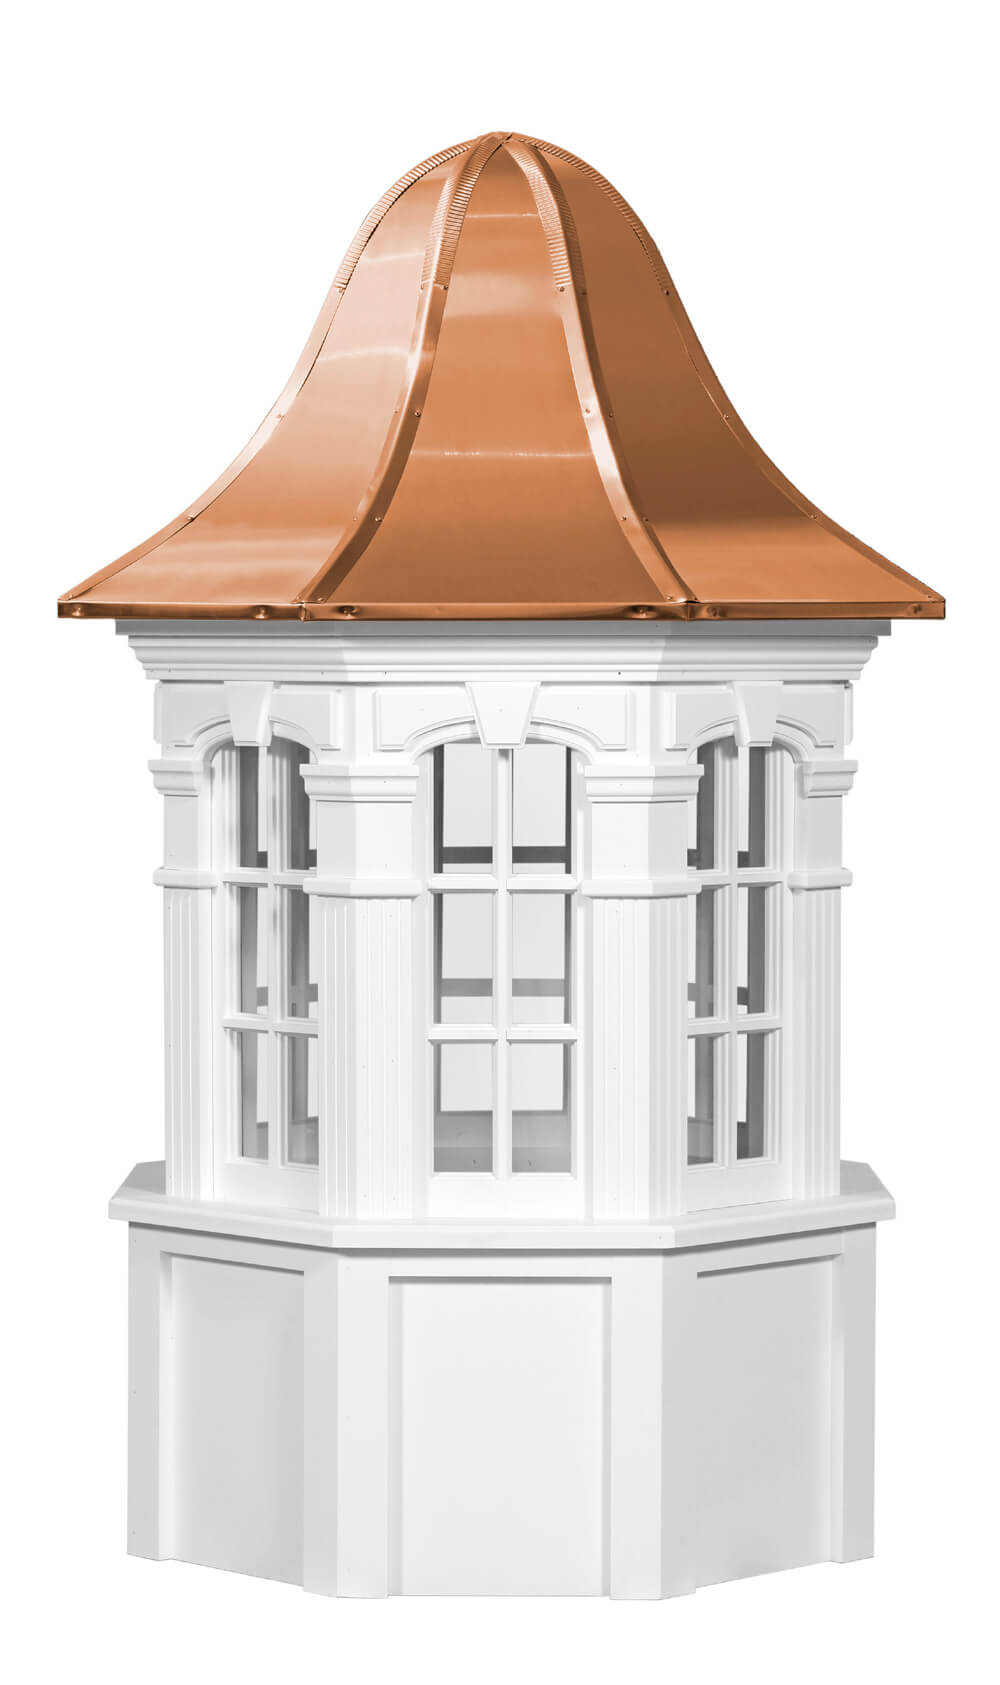 Hancock Series Vinyl - Weymouth Octagon Cupola With Windows & Bell Roof